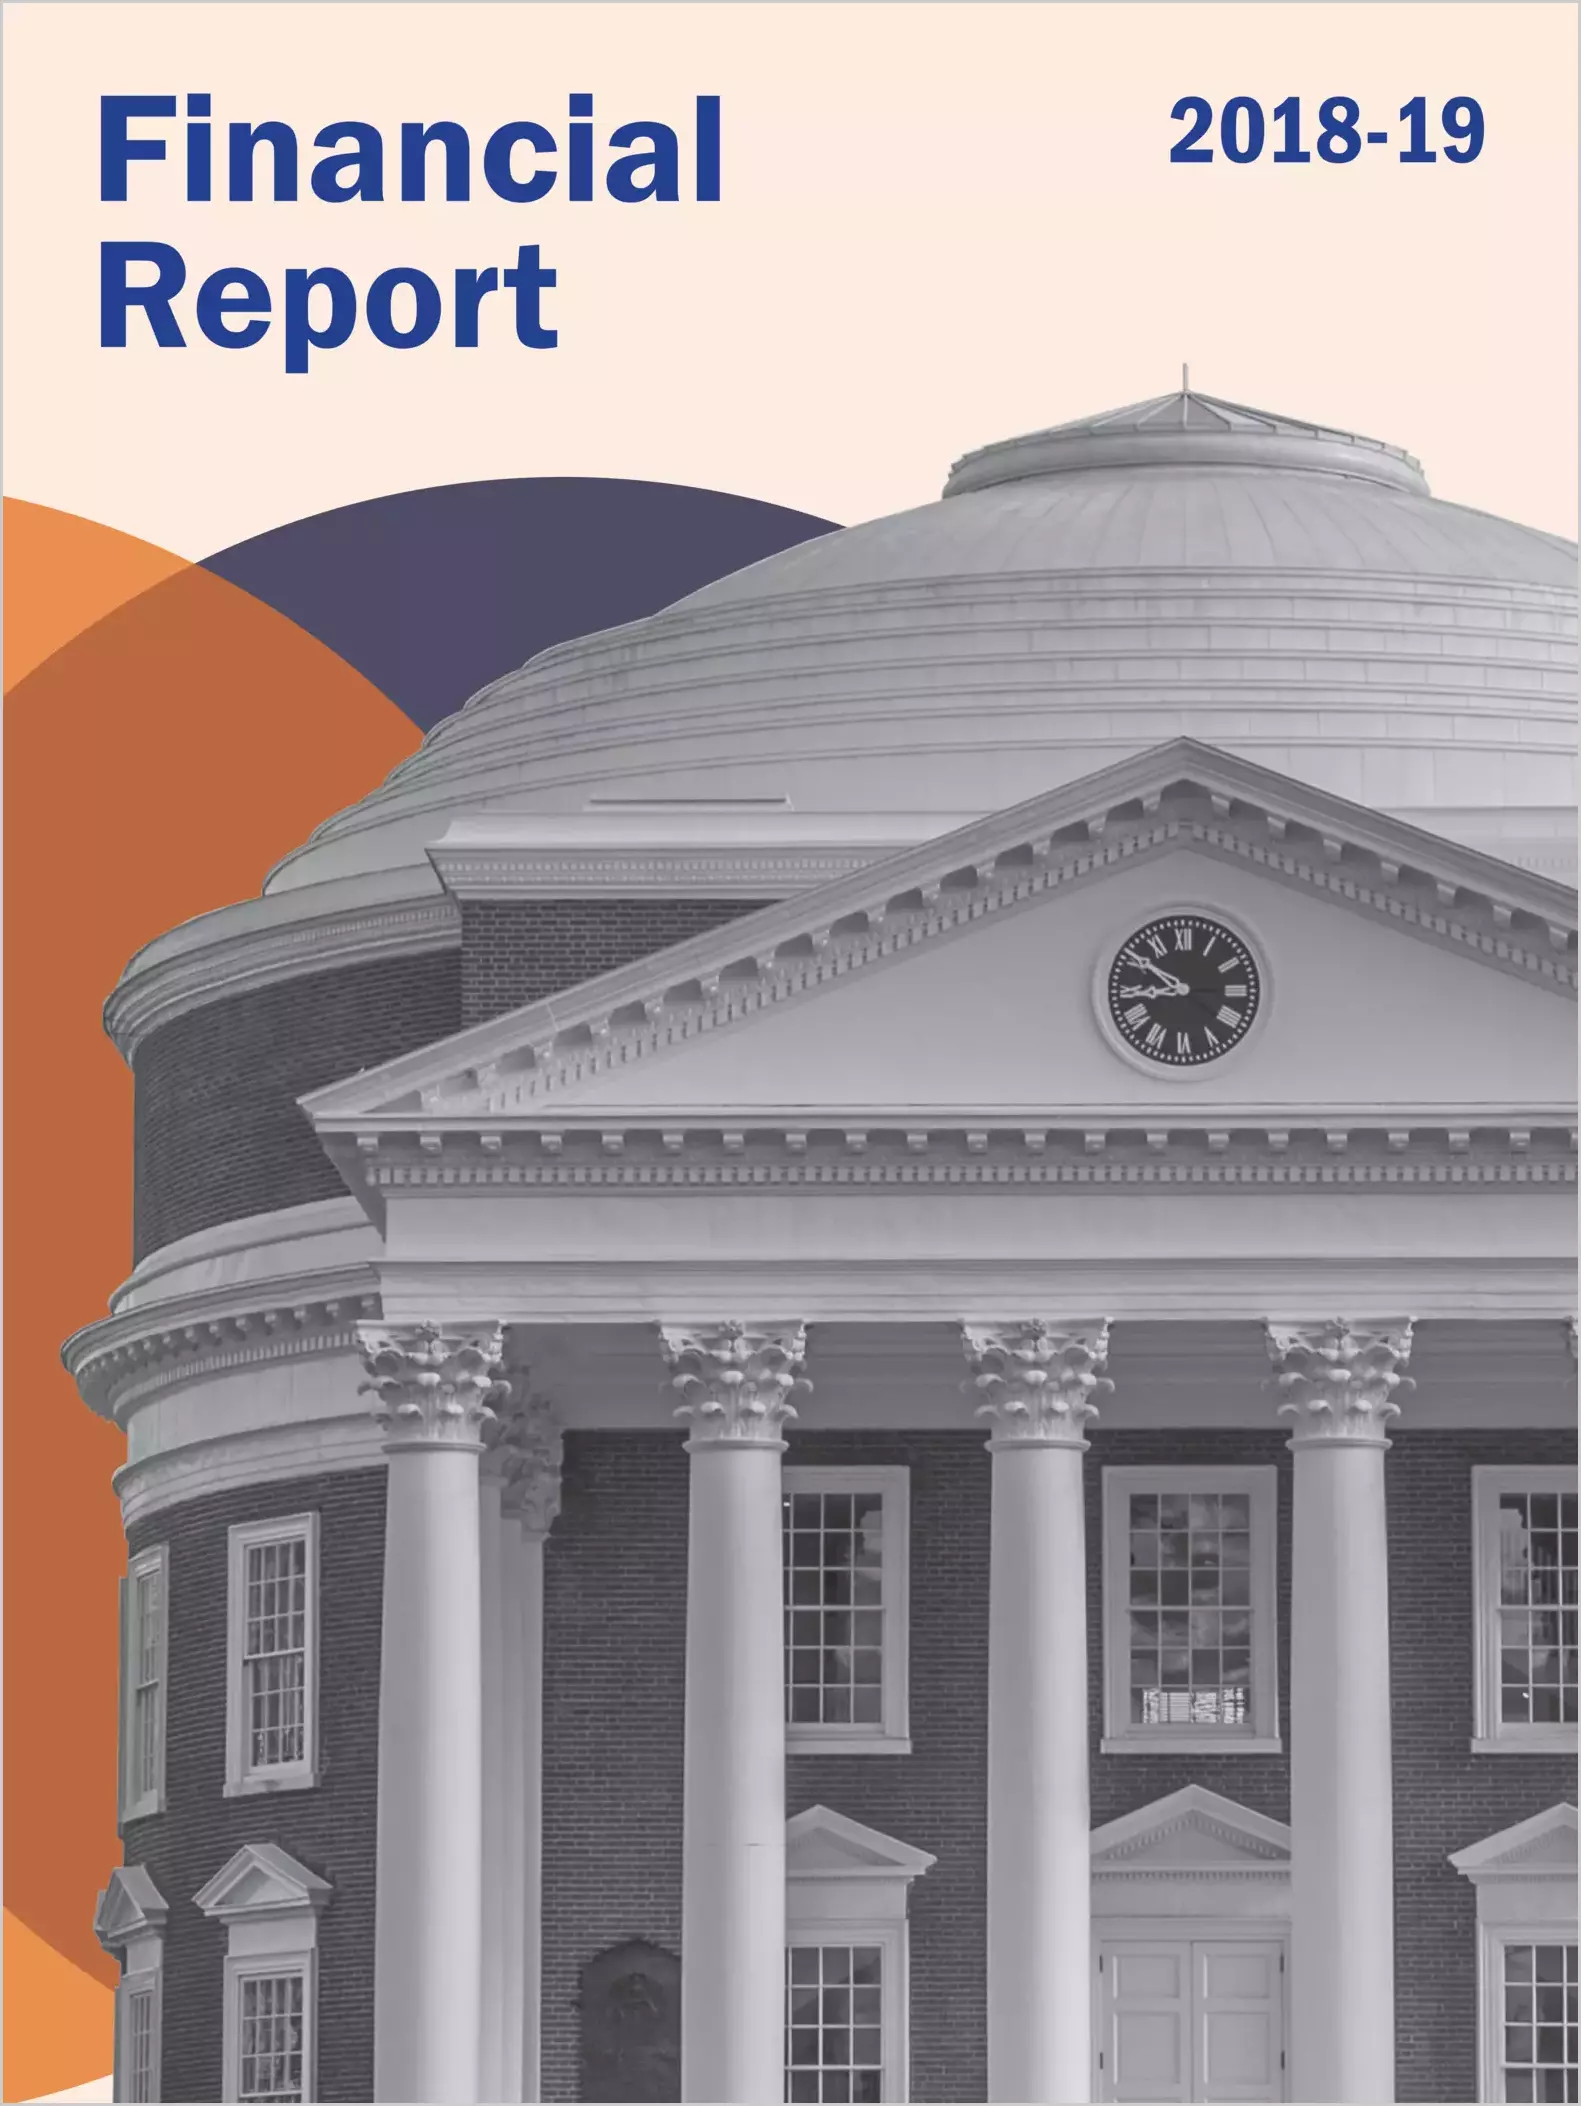 University of Virginia Financial Statements for the year ended June 30, 2019